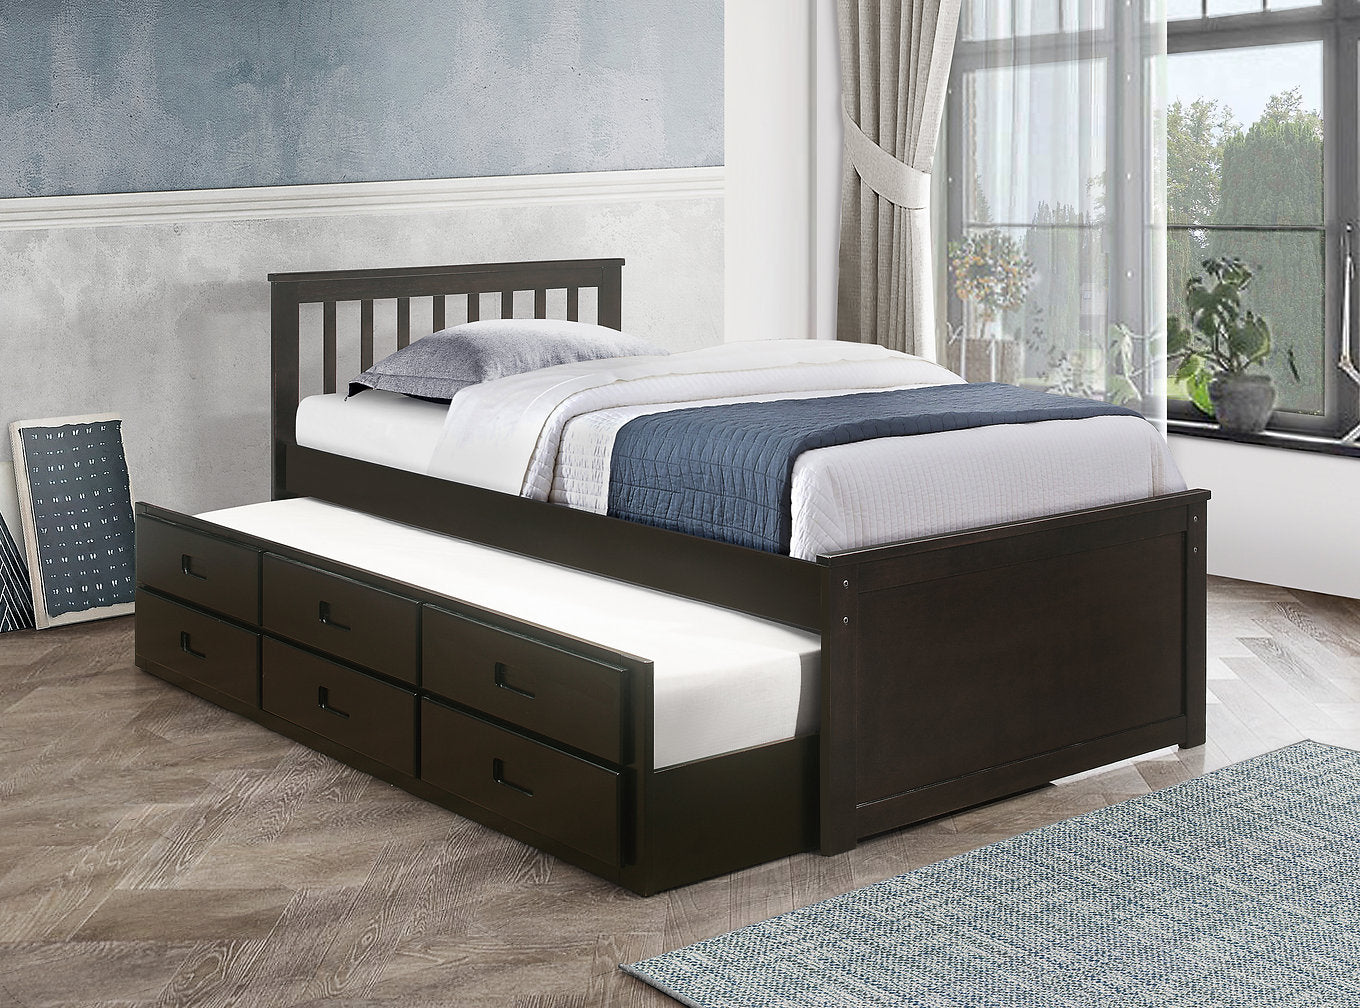 IF-300-E Twin/Twin Captain Bed with Pull-Out Trundle Bed and 3 Pull-Out Drawers (Espresso)